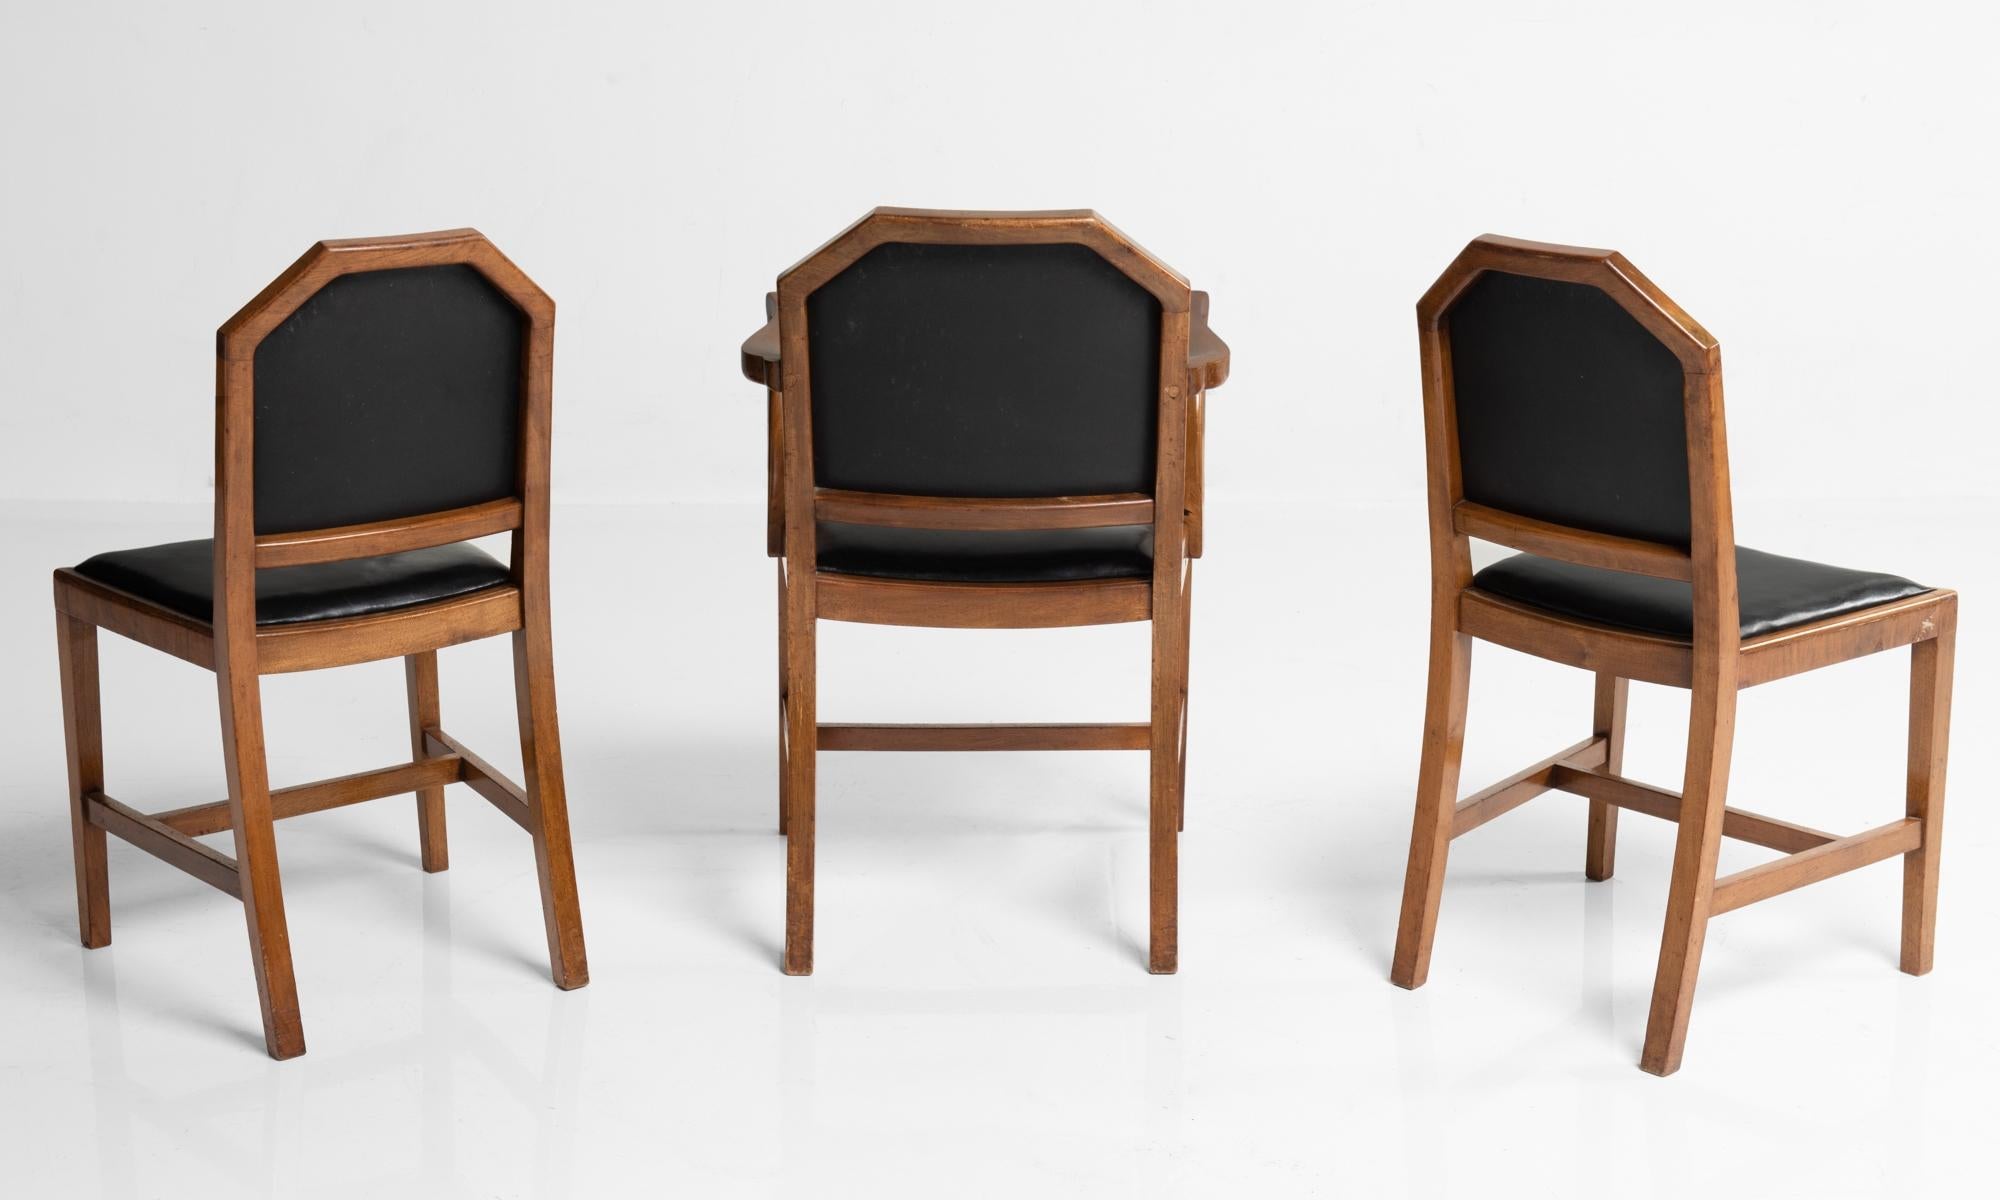 English Walnut and Leather Dining Chairs by Heals of London, England, circa 1915